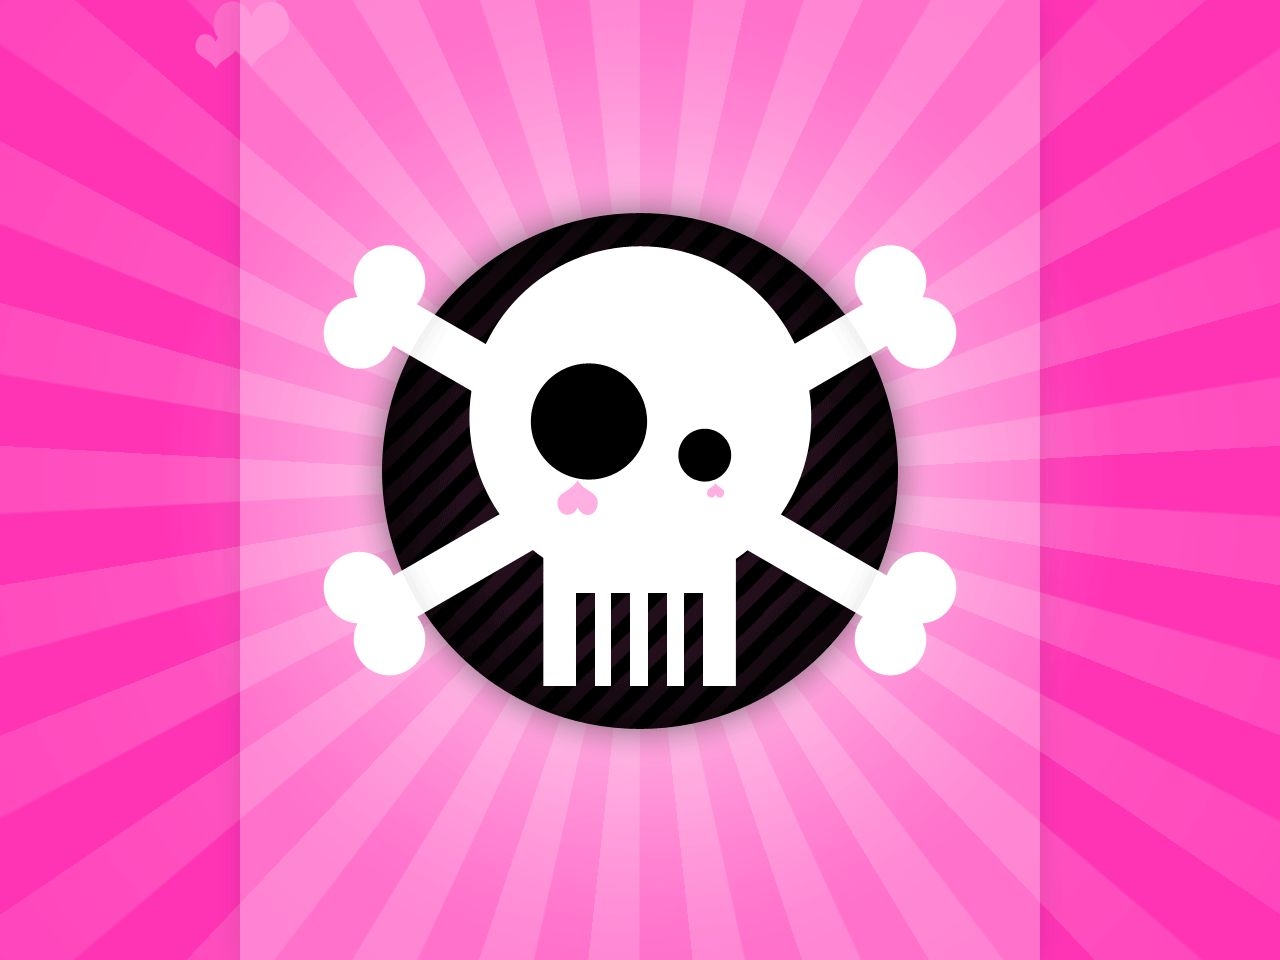 Girly Skull Wallpapers to Download.